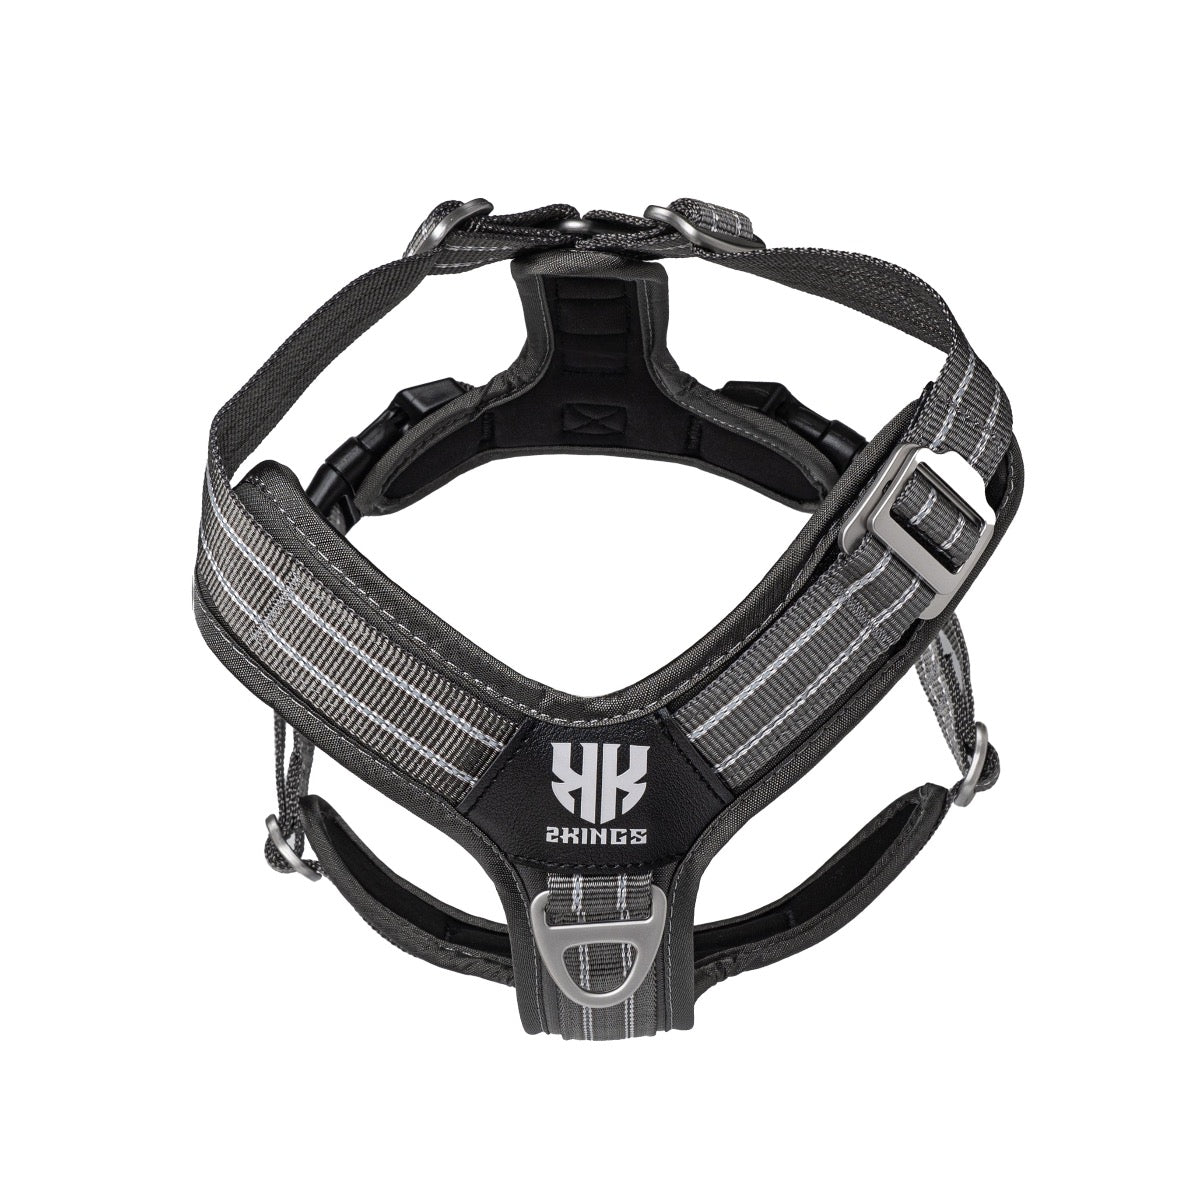 Adjustable Dog Harness with Double-Handed Lead Set - Lightweight & Reflective -Grey.